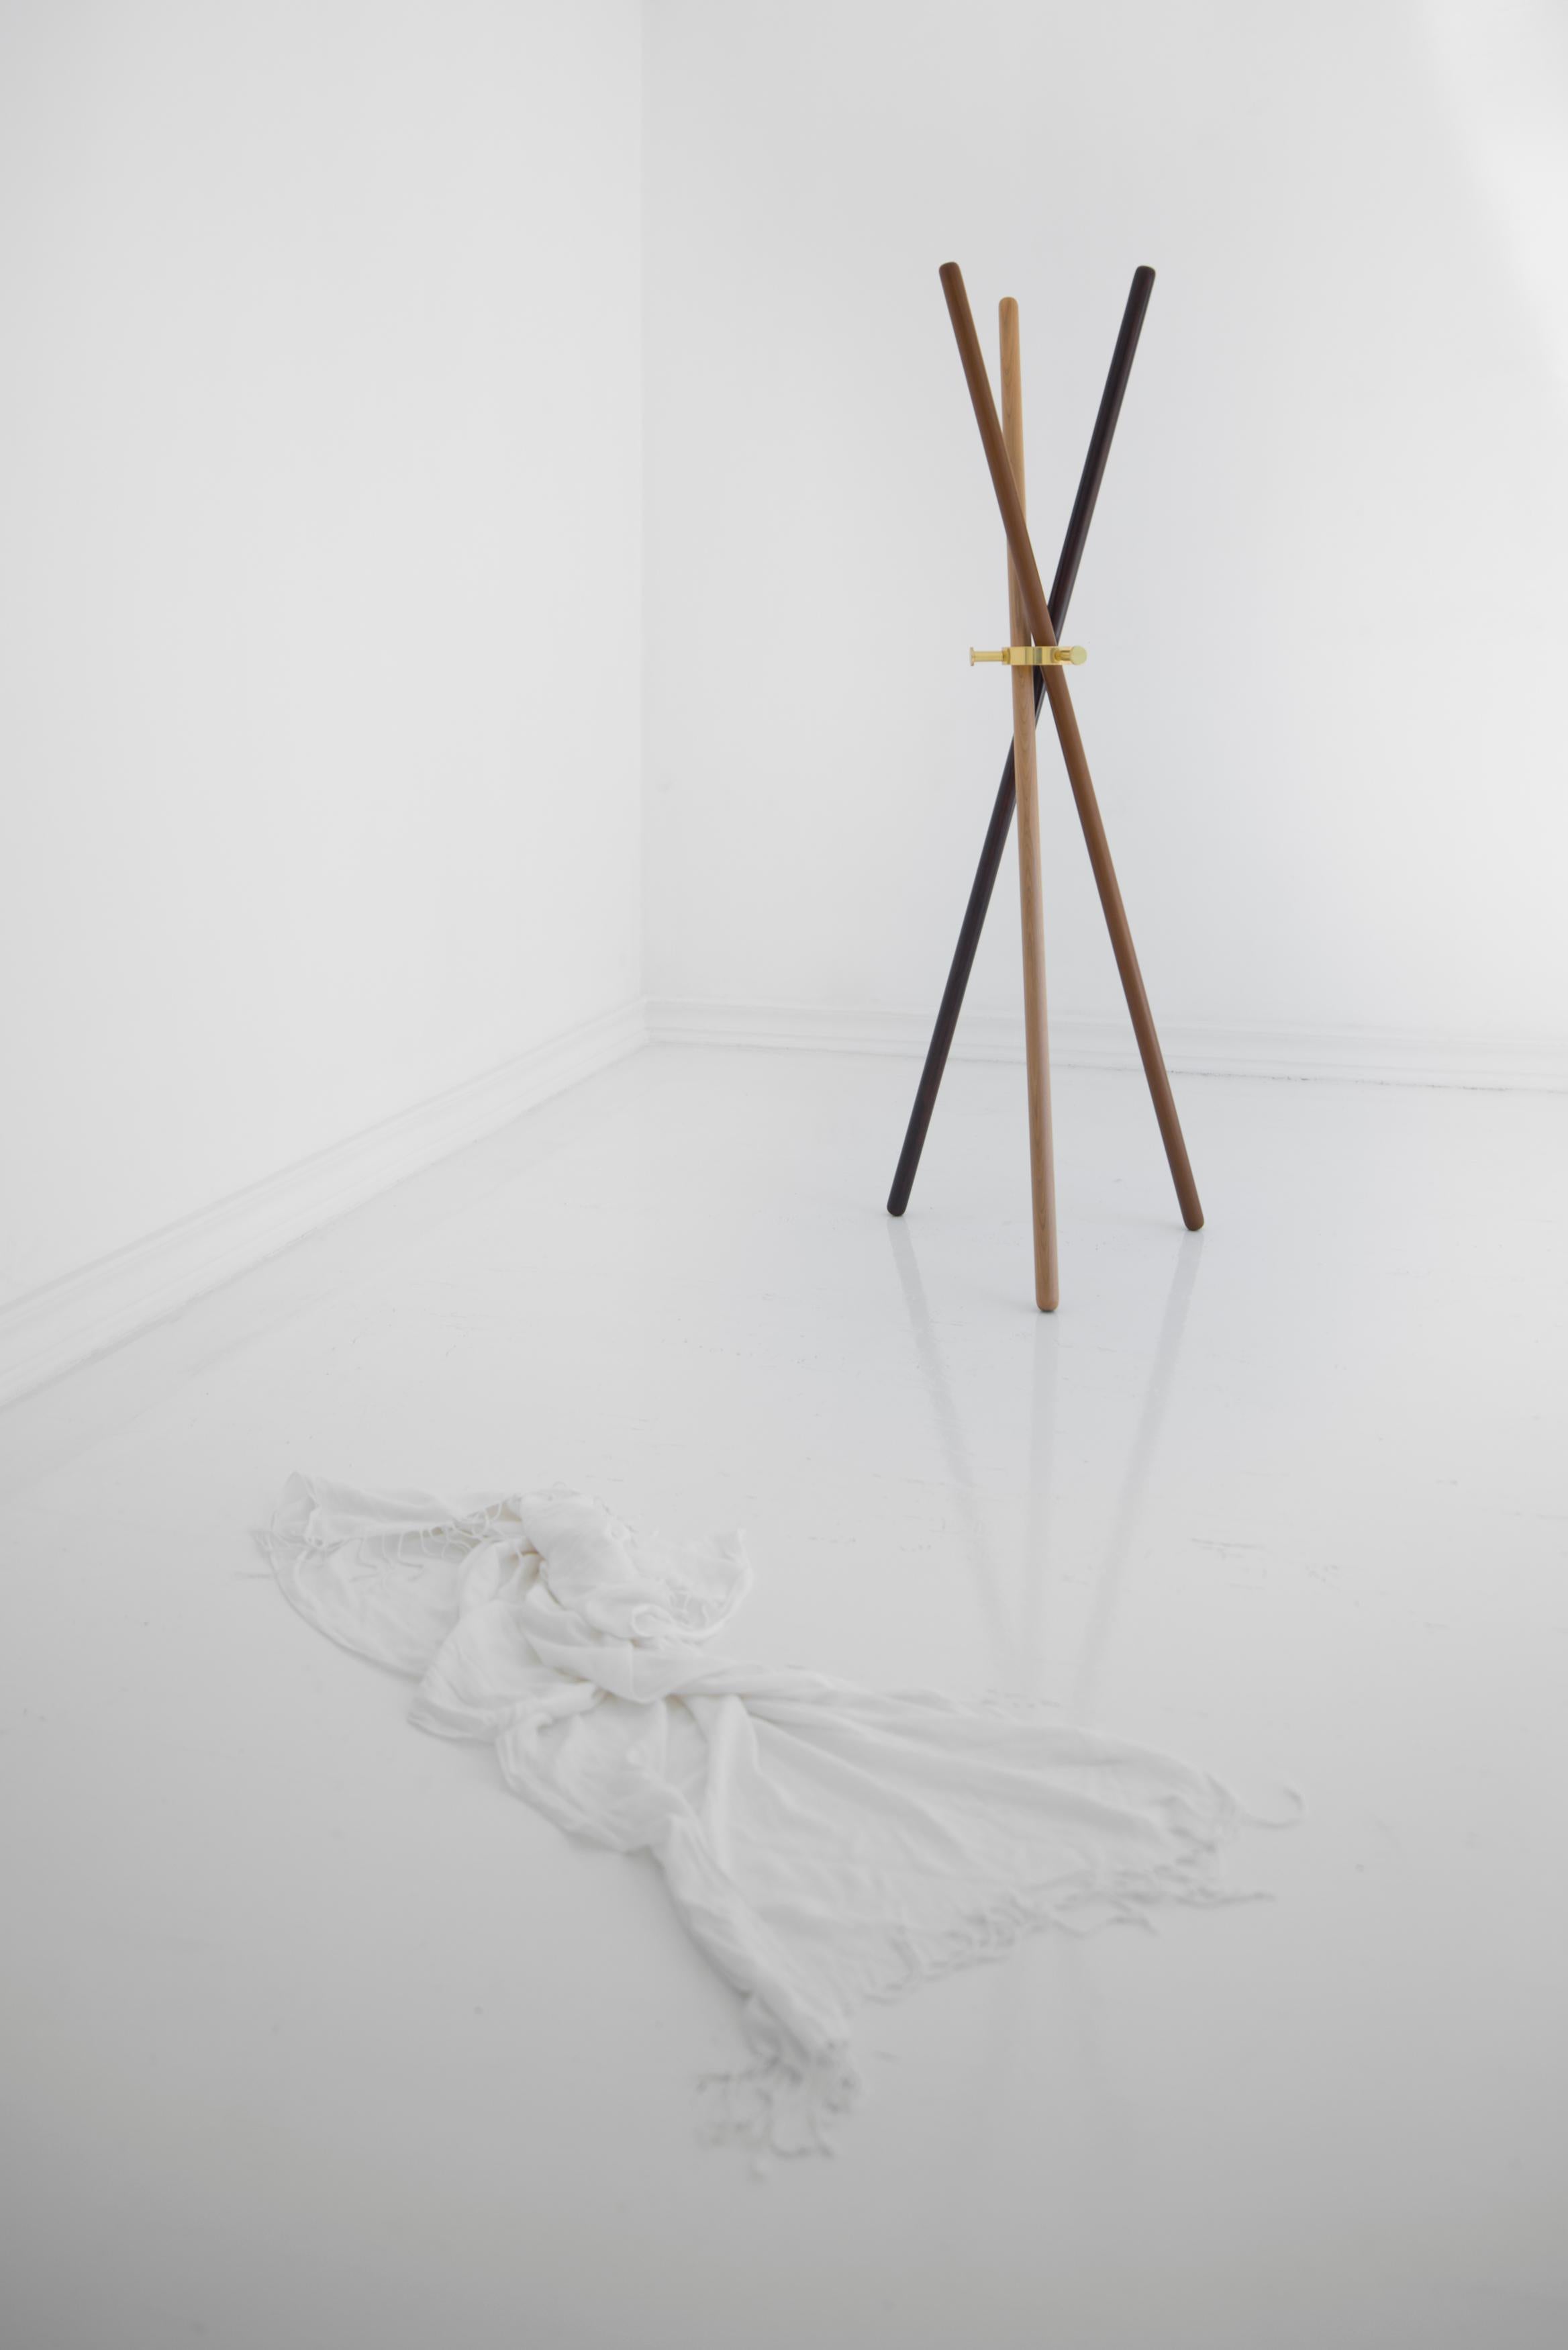 Modern Brass and wood Sculpted Coat Stand, Leandro Garcia, Contemporary Brazil Design